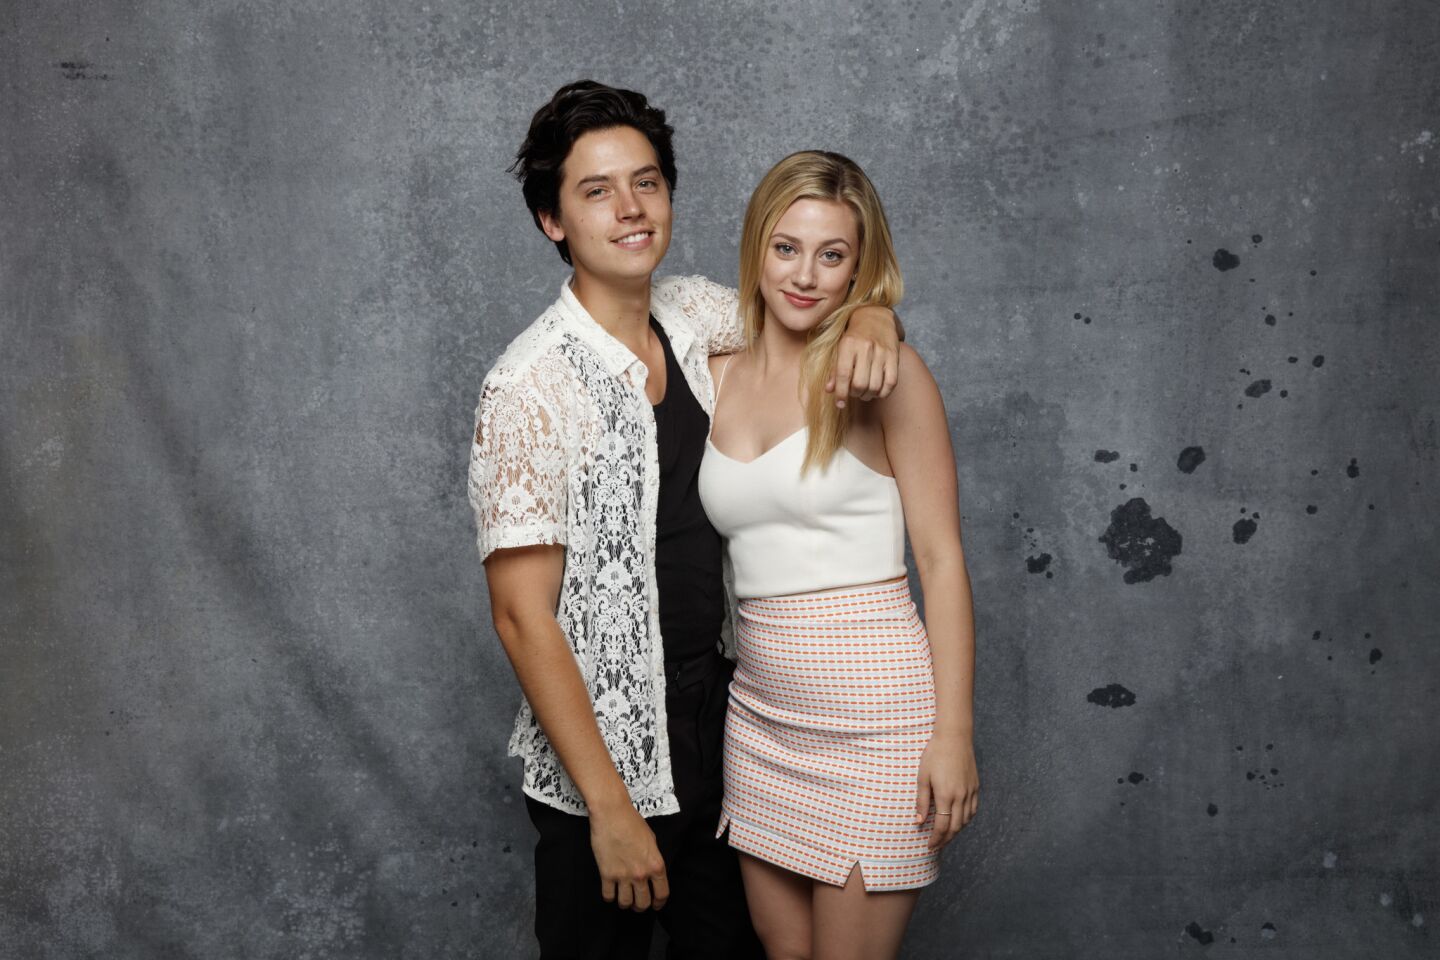 Cole Sprouse and Lili Reinhart from the television series "Riverdale."